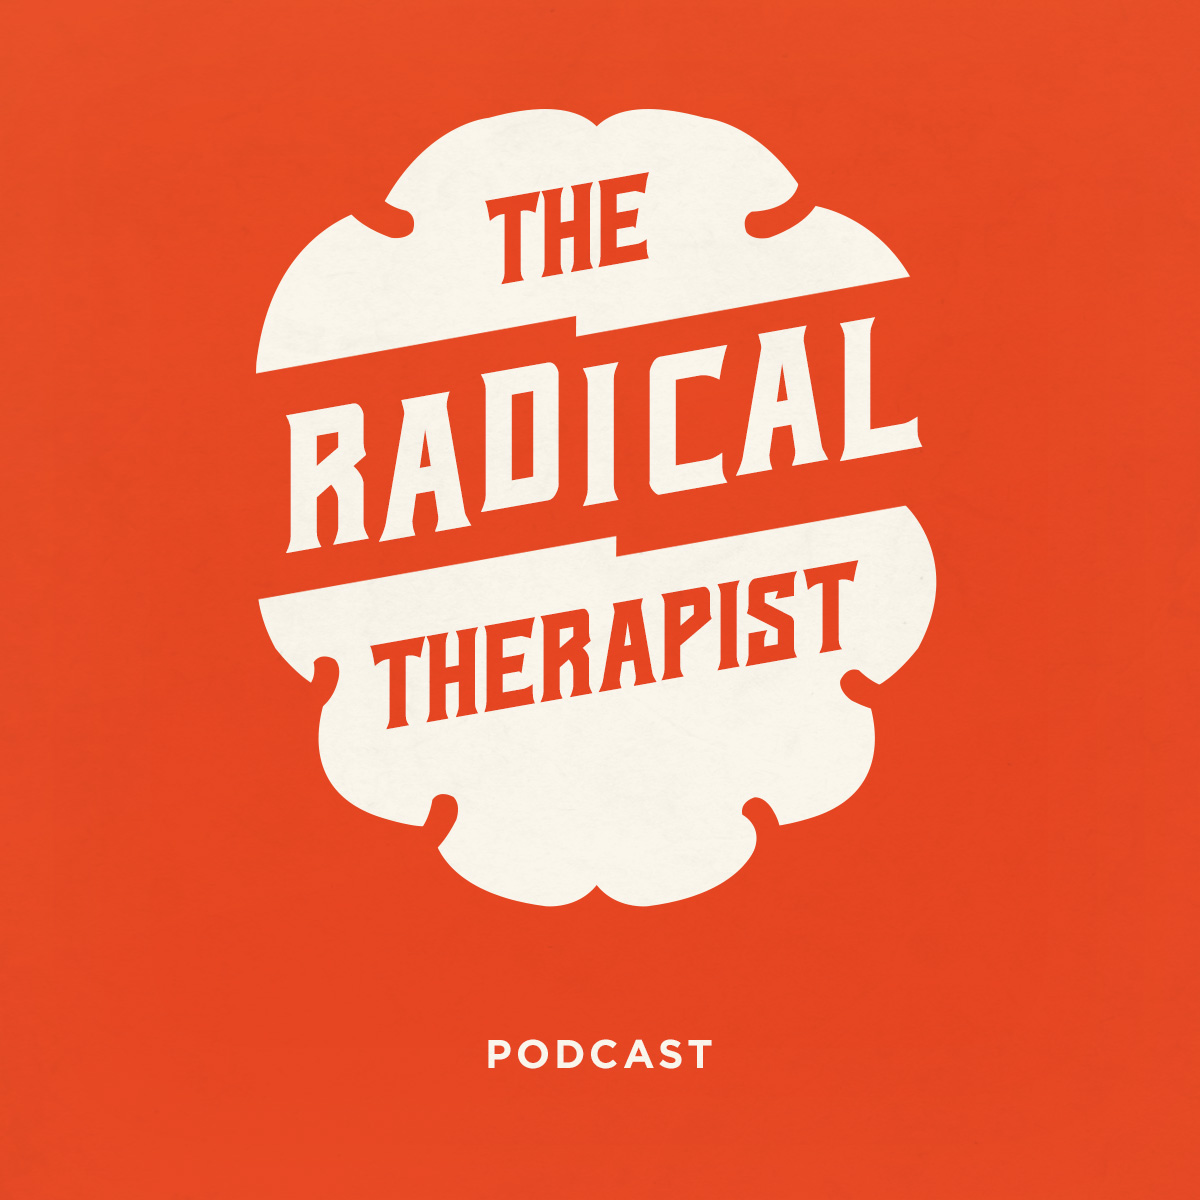 The Radical Therapist #039 – Narrative Supervision as a Social Justice Practice w/ Sarah Kahn, PhD, LMFT